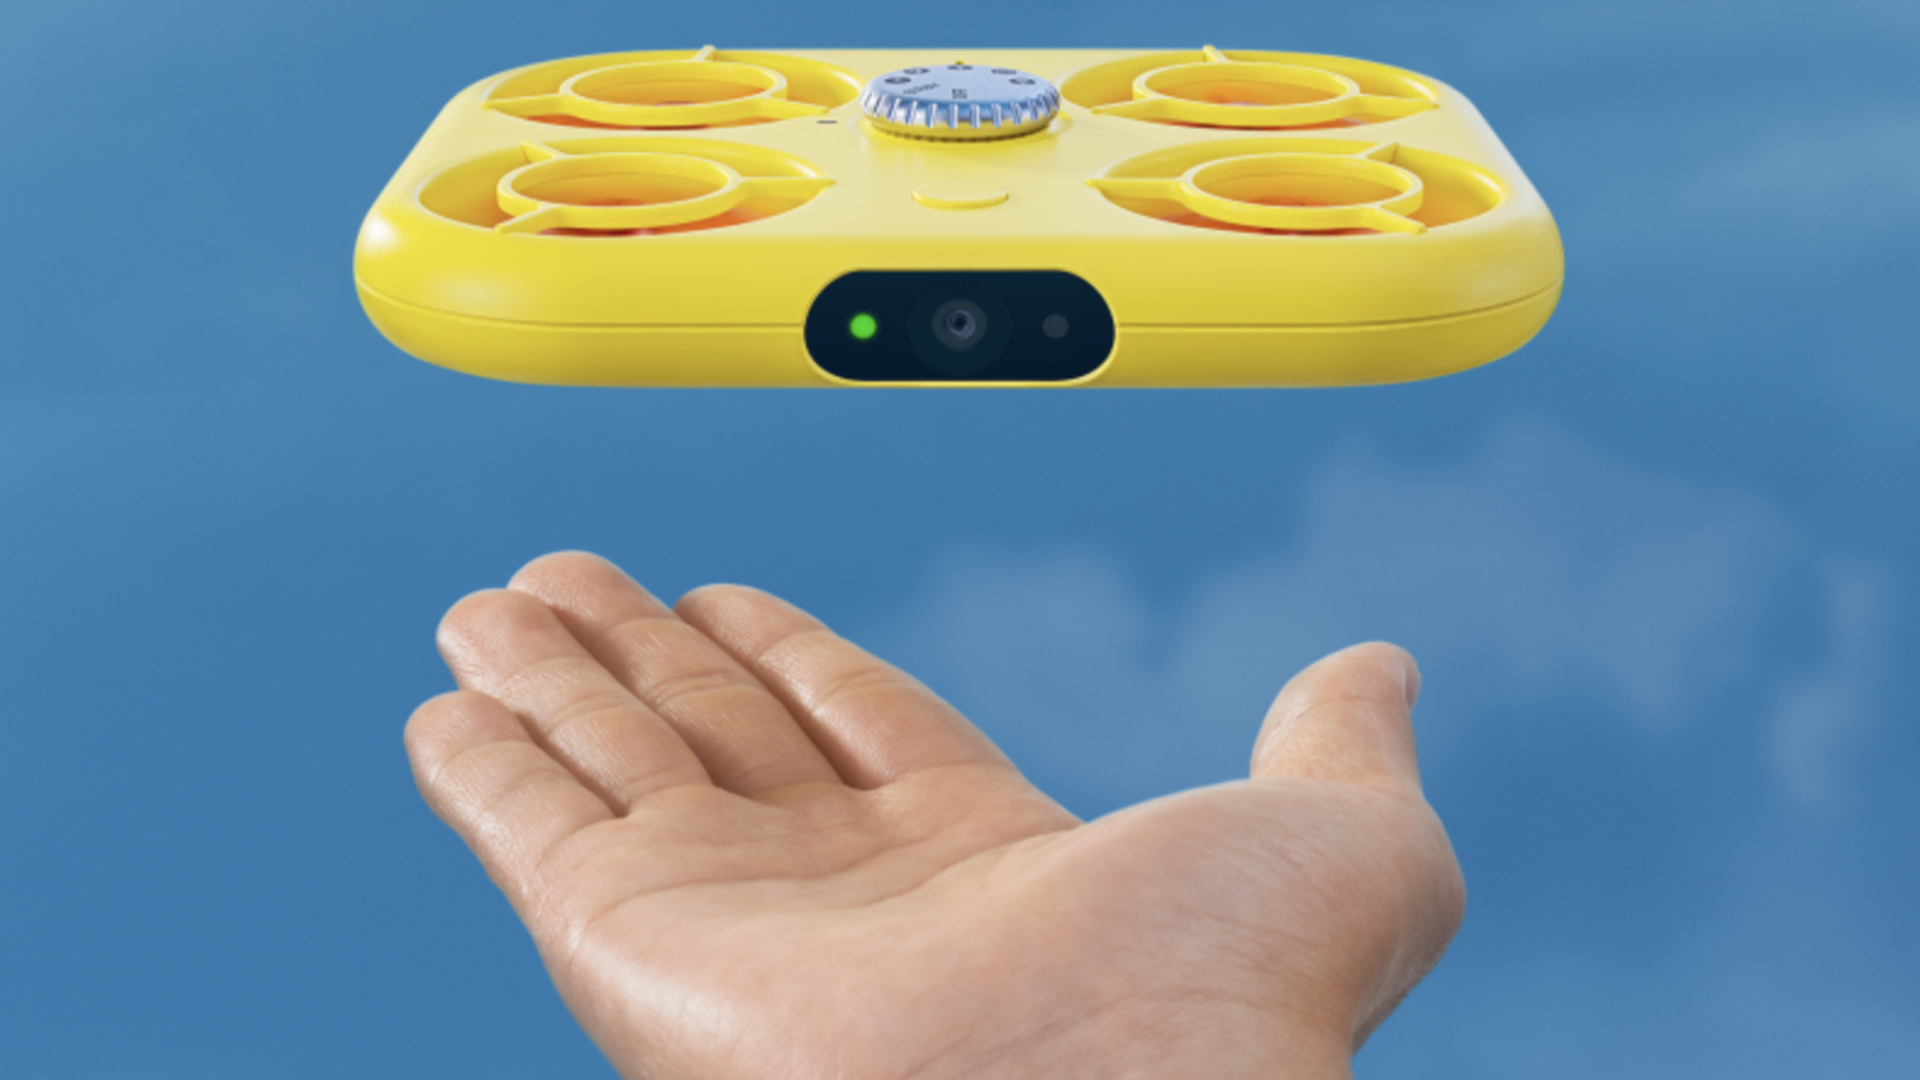 Image of Snapchat's new yellow Pixy, a flying camera that people can use to take selfies